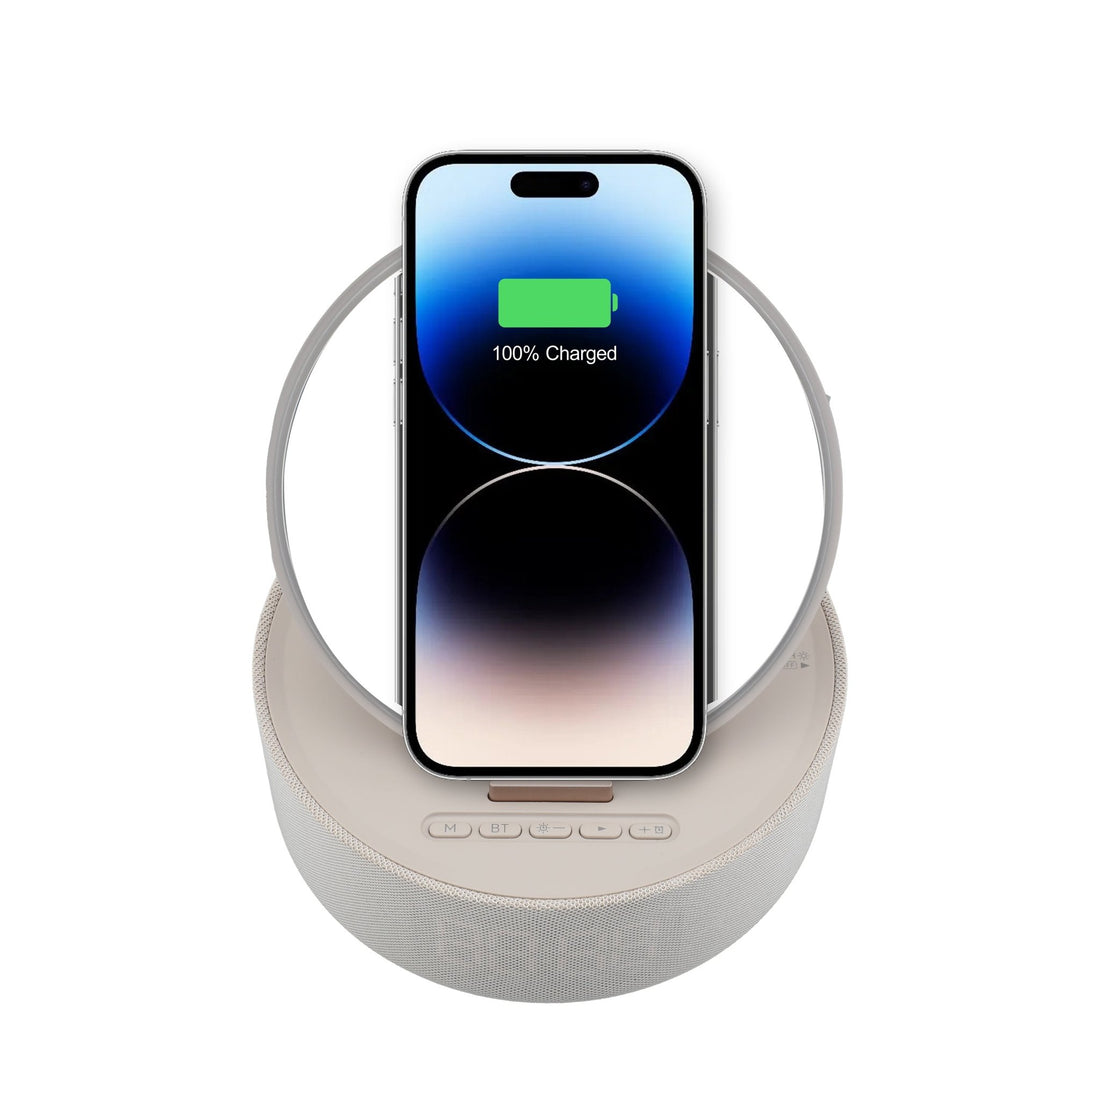 UK Technology Vanity Mirror wireless charging a phone on the mirror